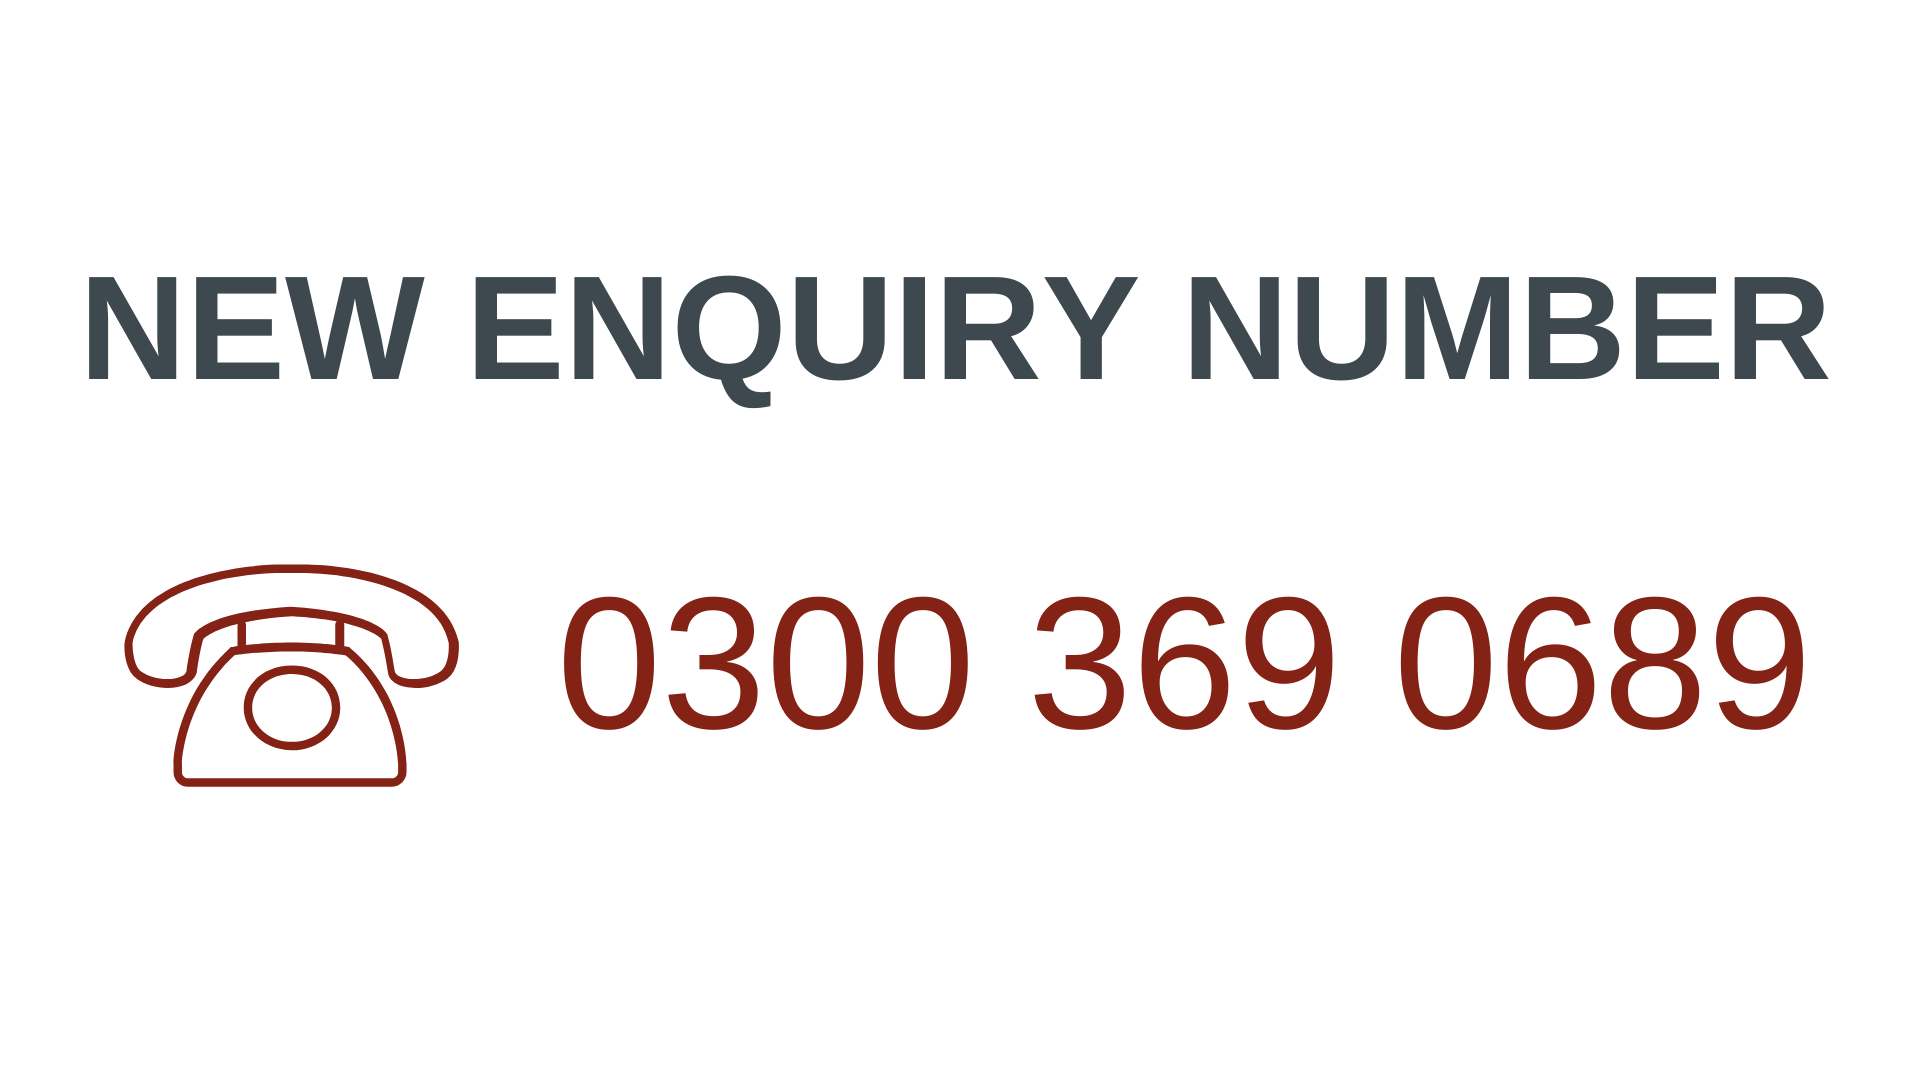 New enquiry number: 0300 369 0689